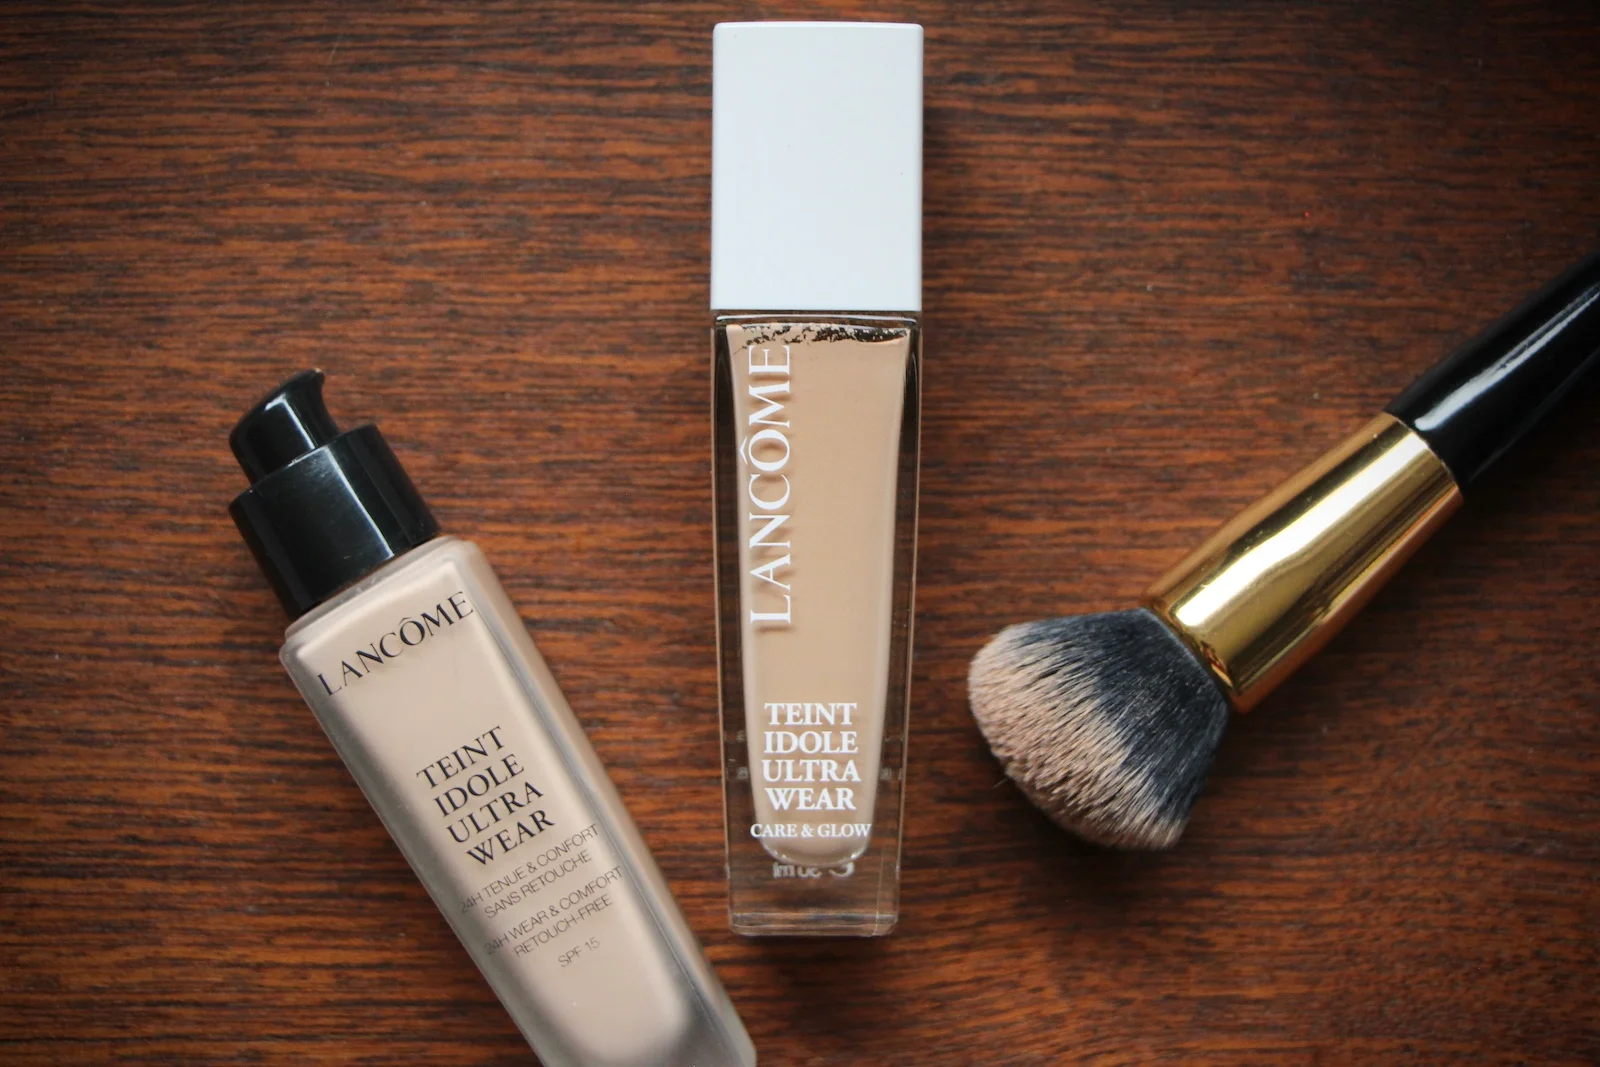 Foundation Review: Lancome Teint Idole Care & Glow